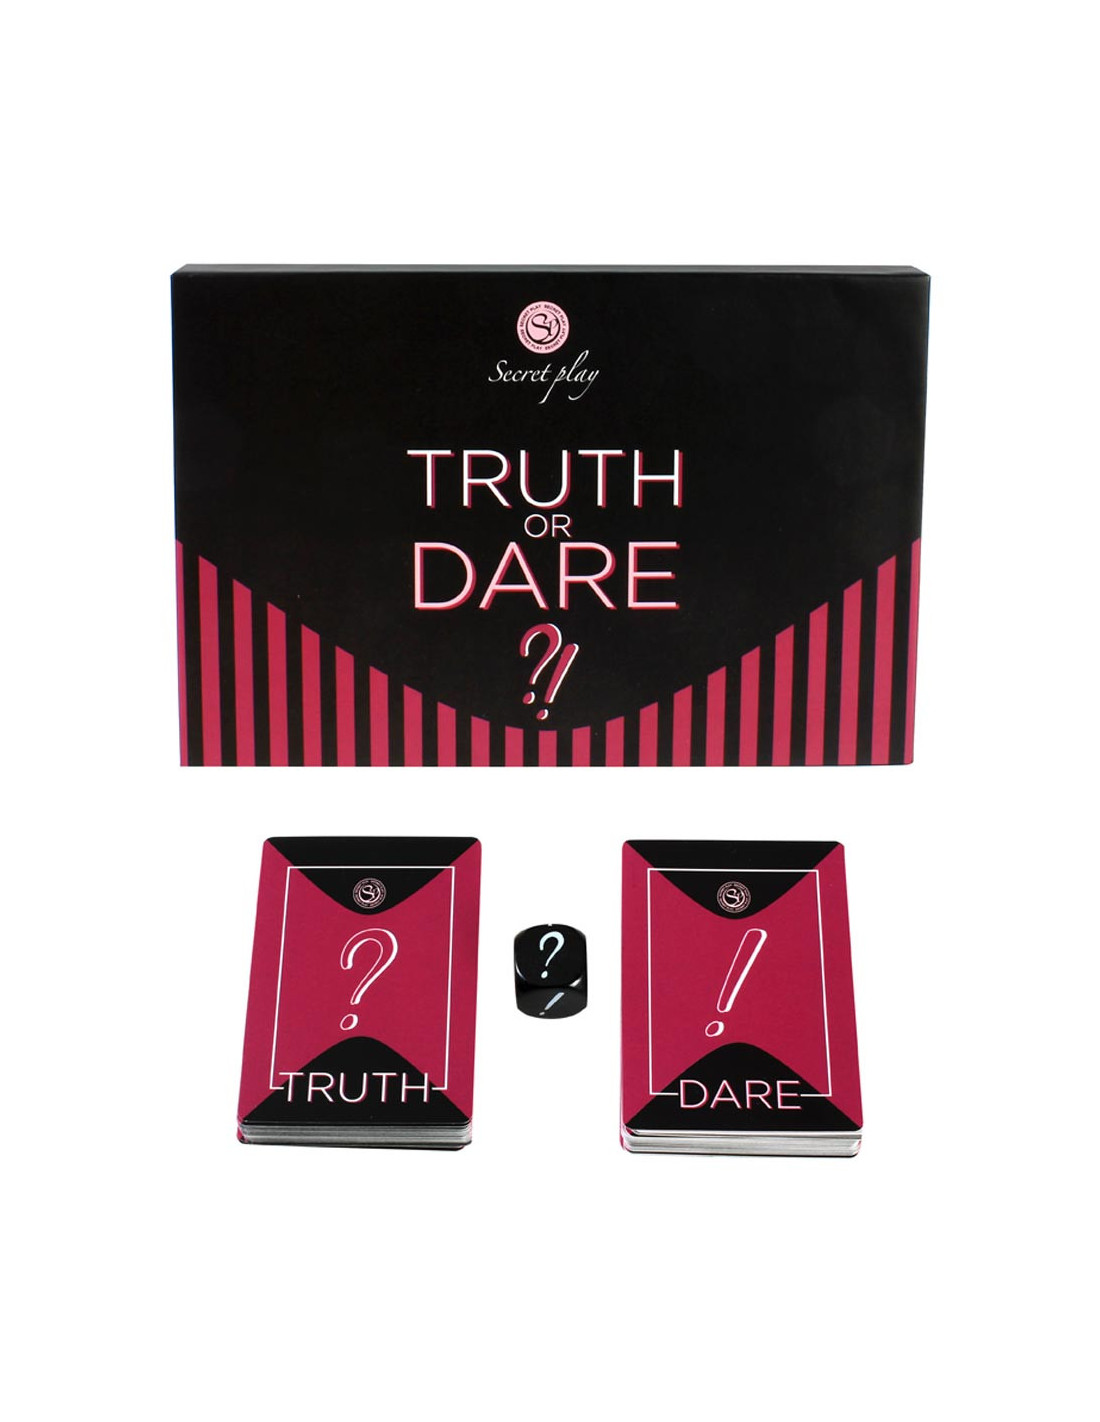 Secret Play Jeu Truth or Dare (consequence ou verite) s